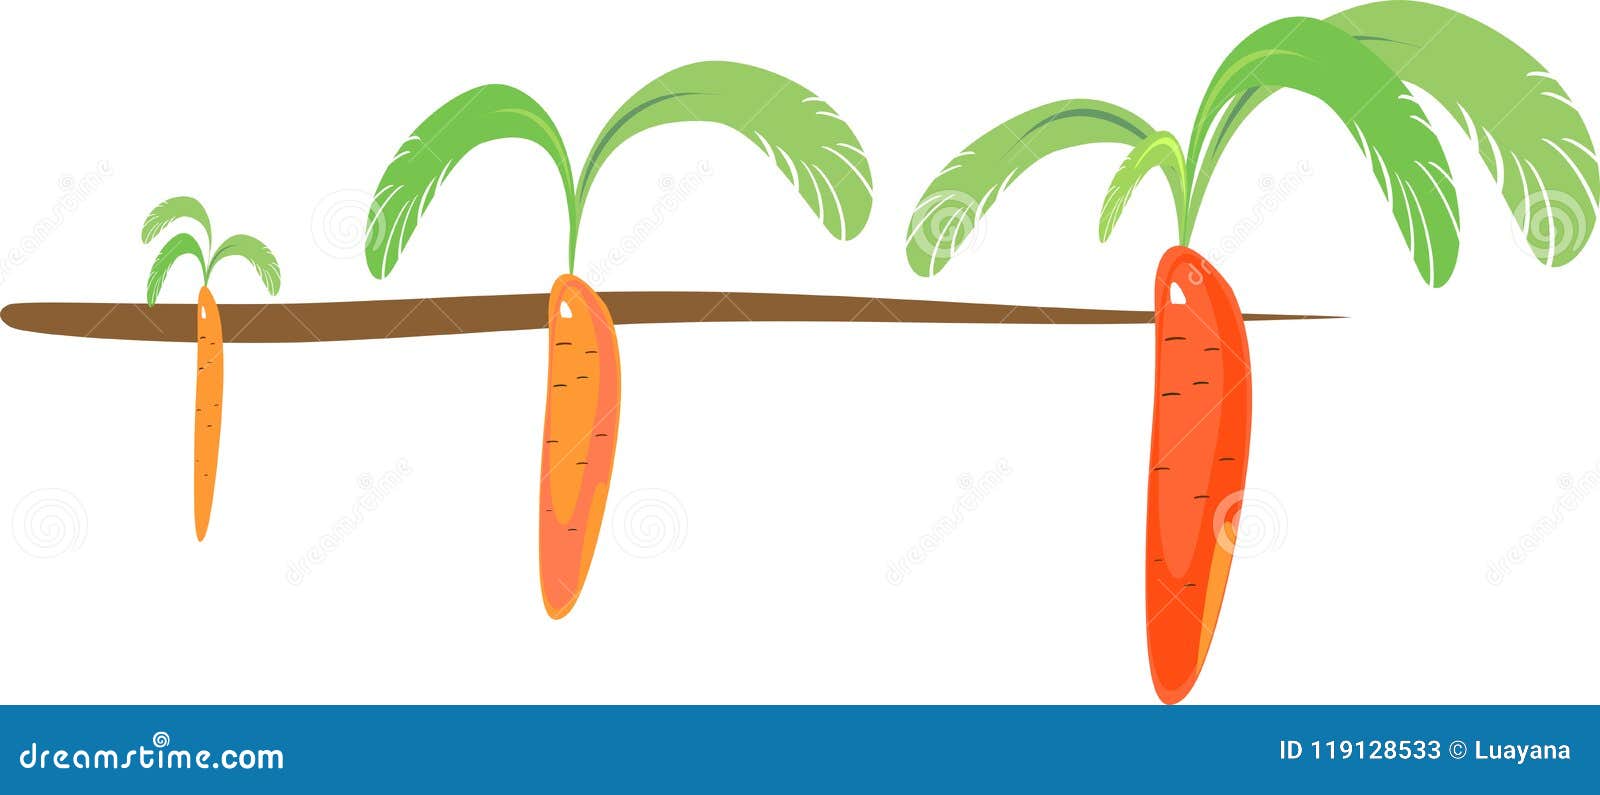 Stages of Growth of Carrots Stock Vector - Illustration of germinating ...